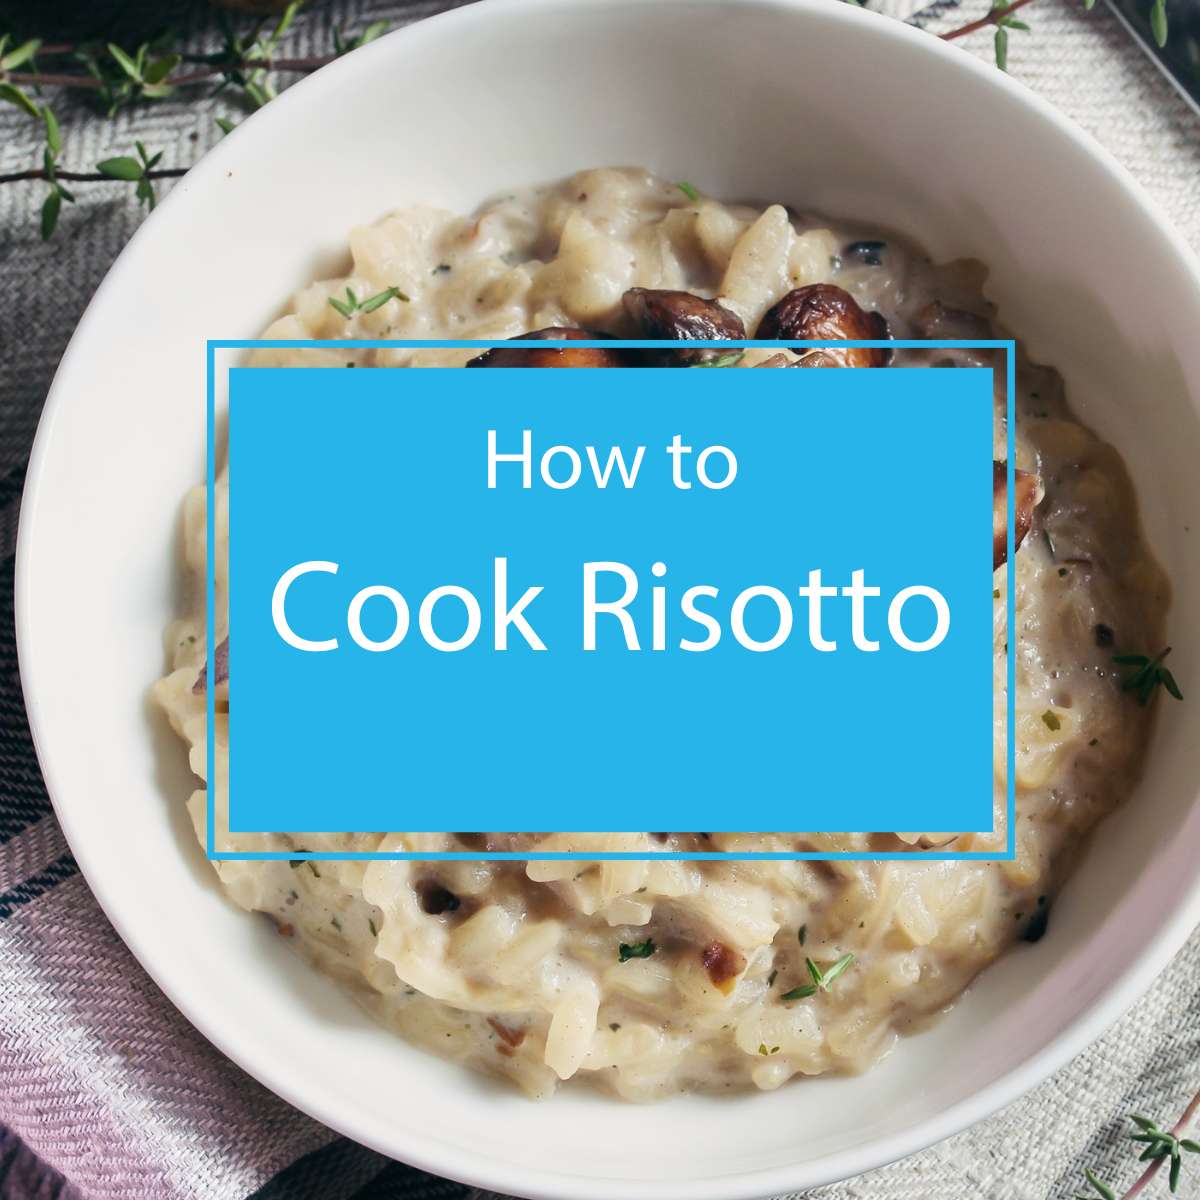 How to Cook Risotto